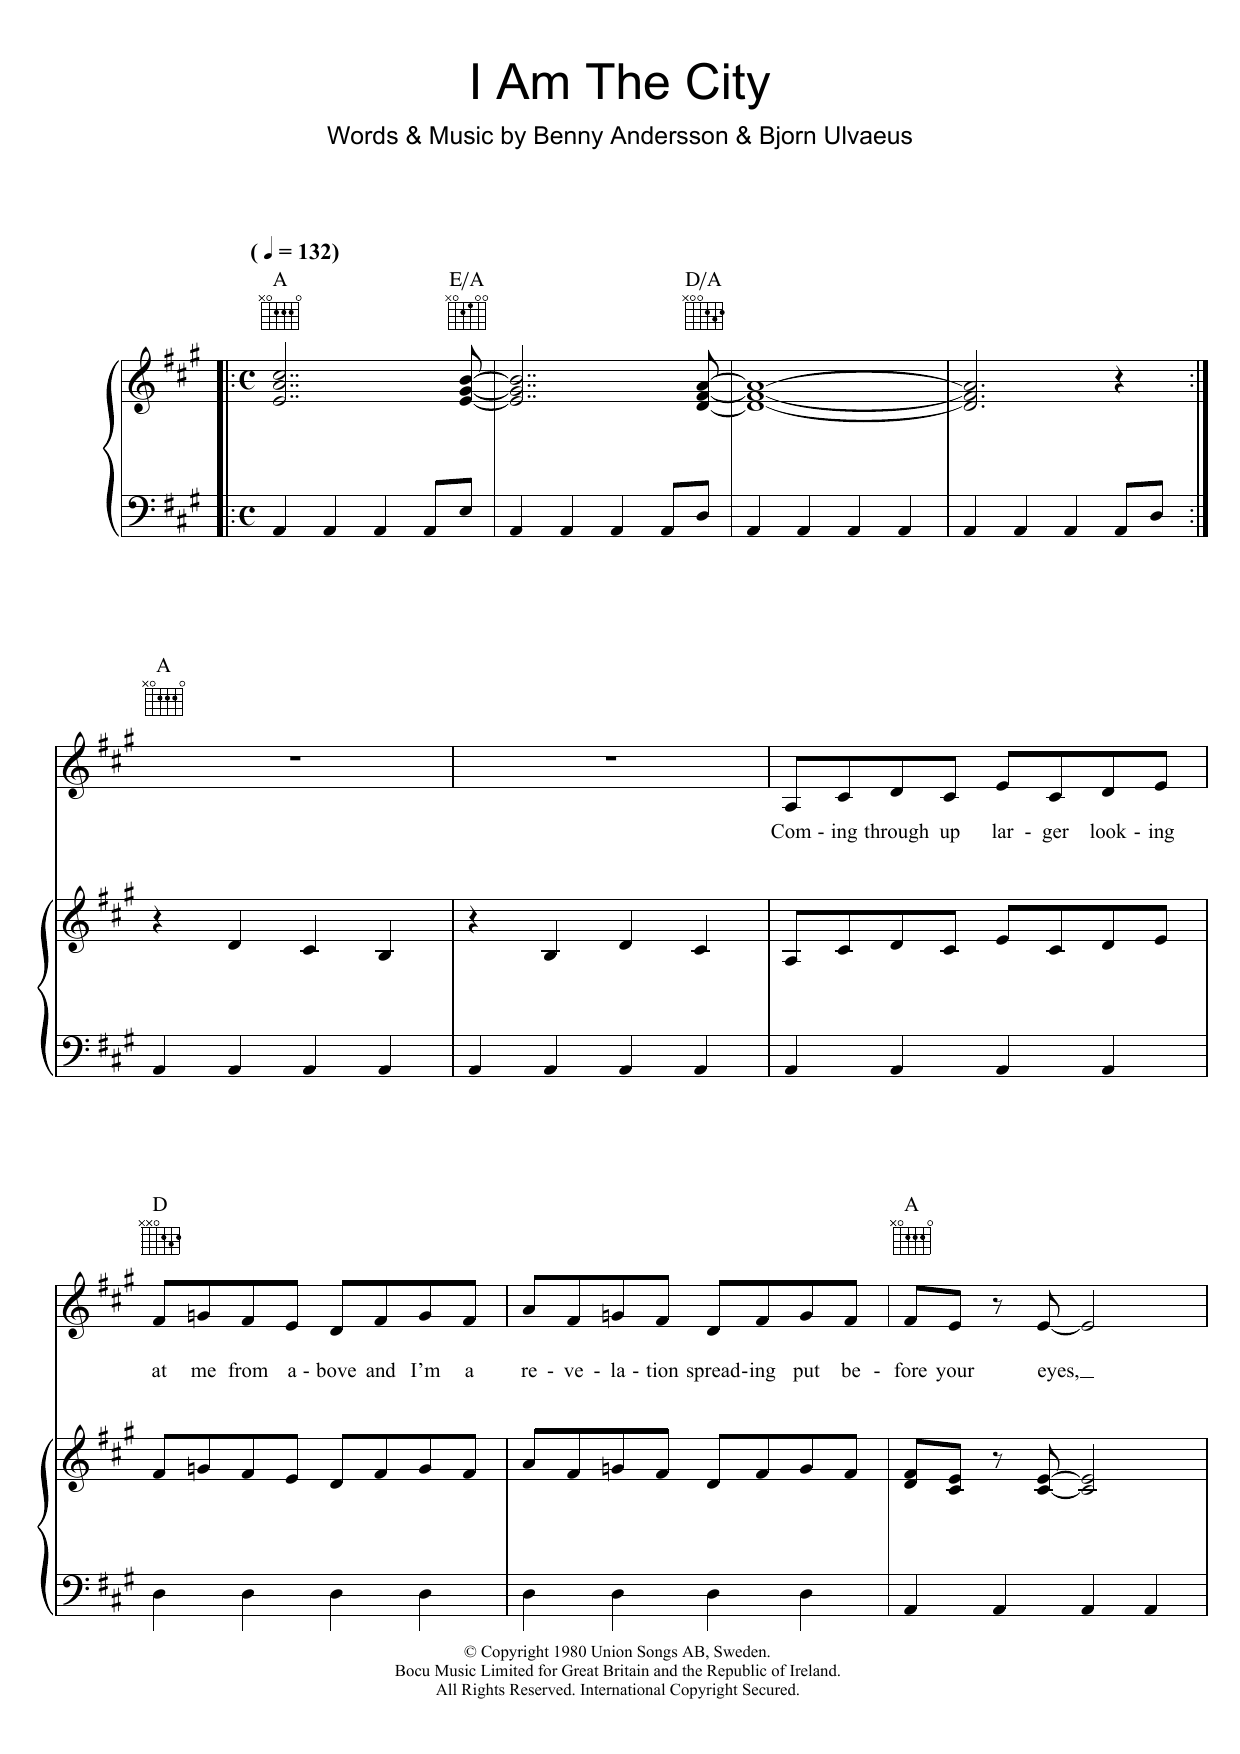 Download ABBA I Am The City Sheet Music